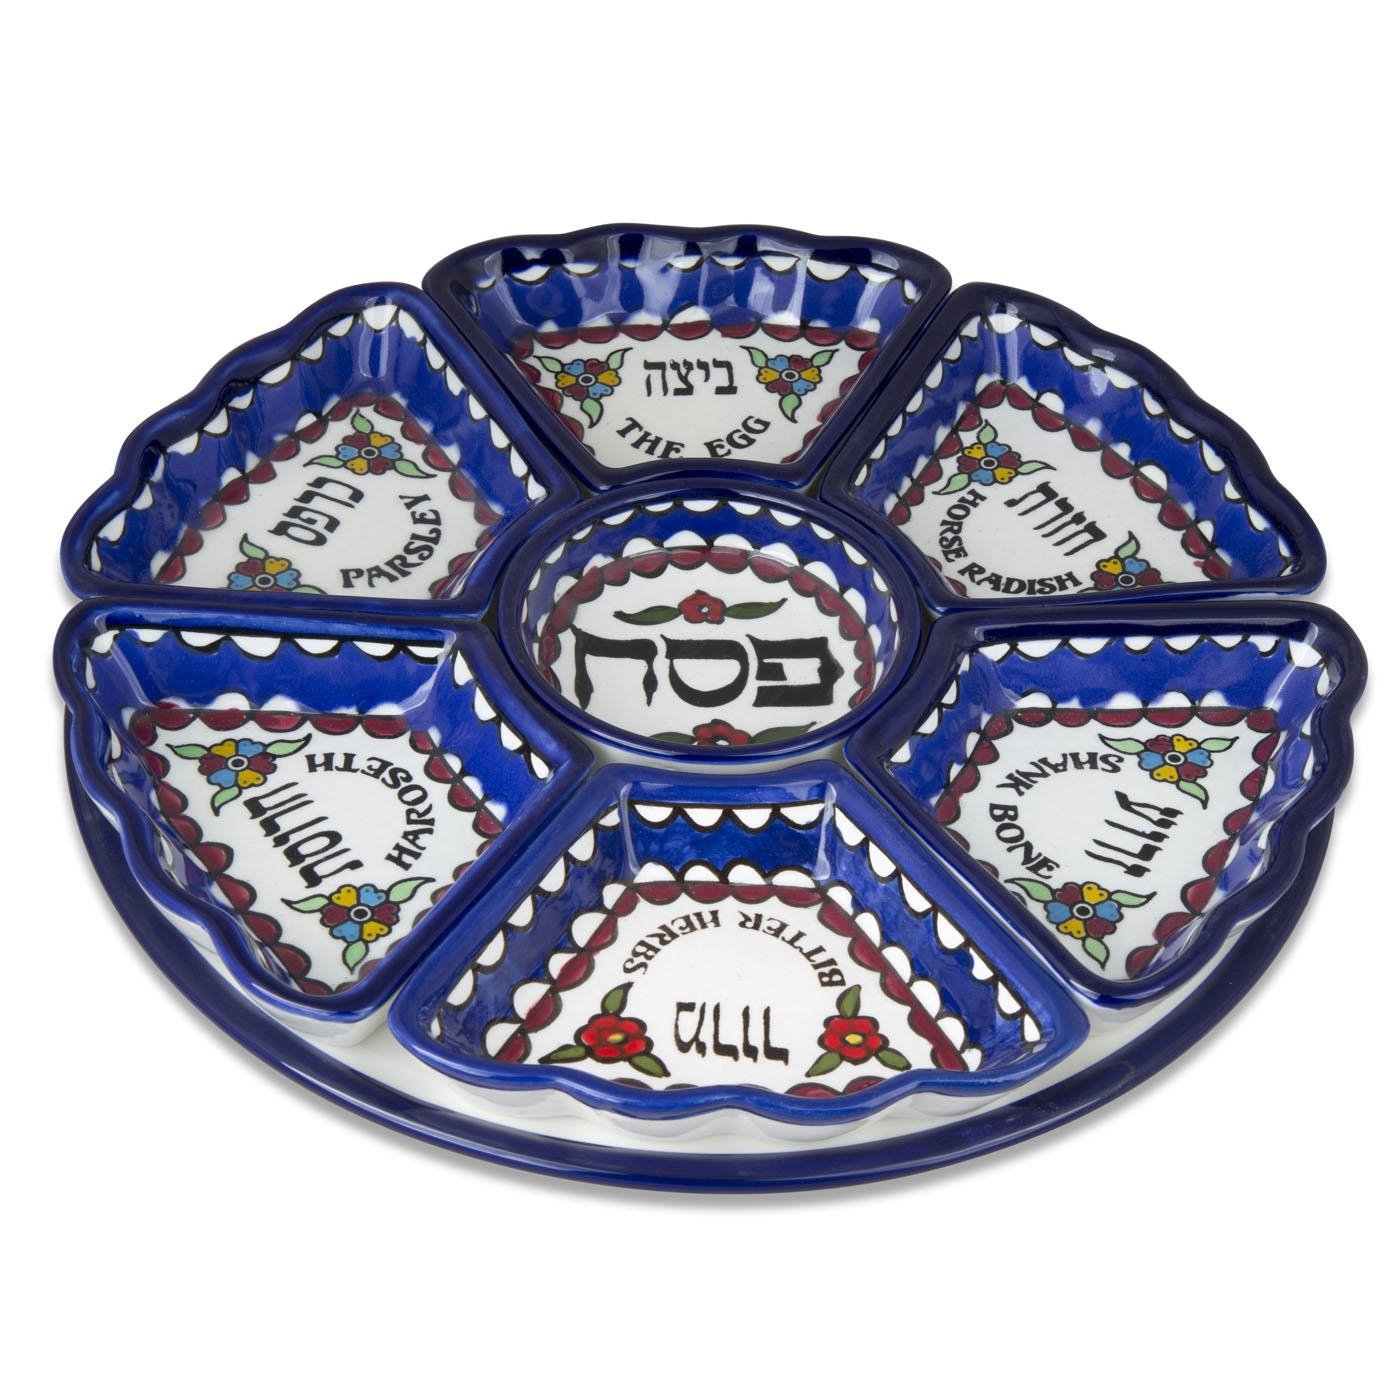 Deluxe Seder Plate With Floral Design By Armenian Ceramics - 1